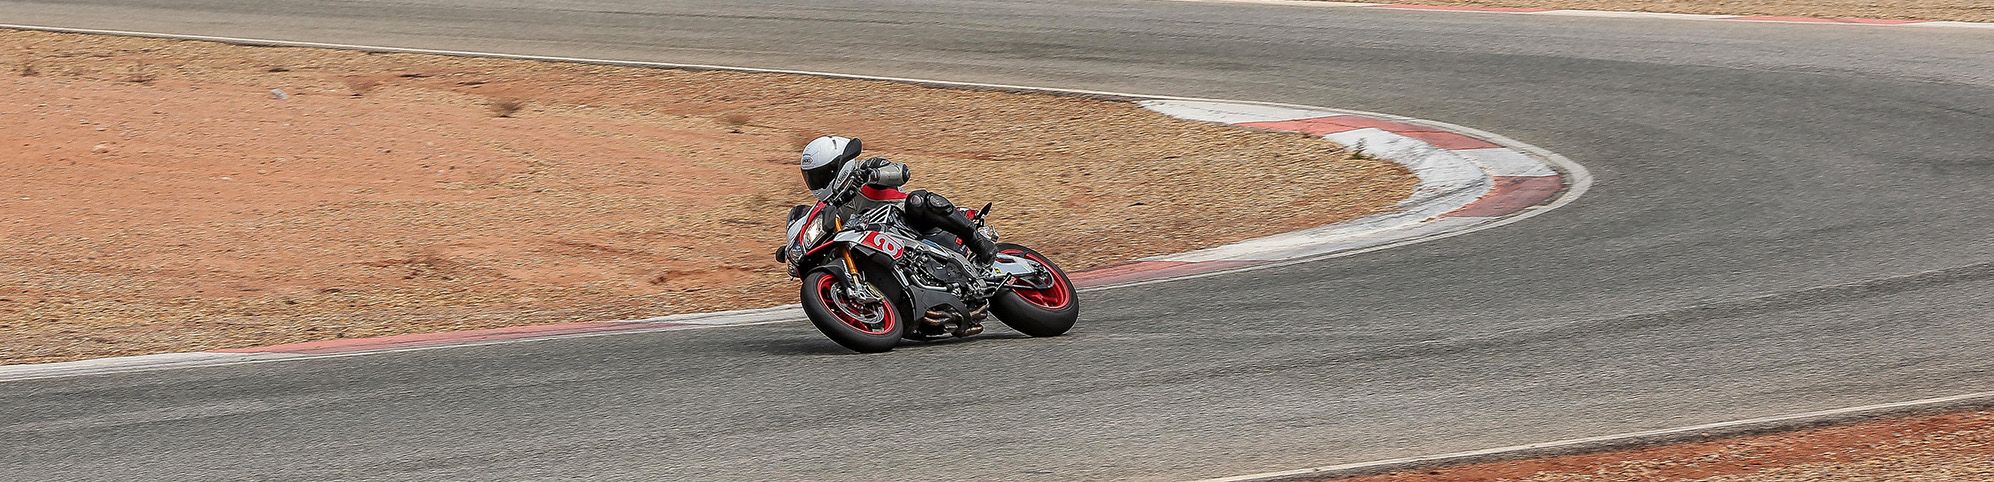 Aprilia Tuono being ridden on a trackday